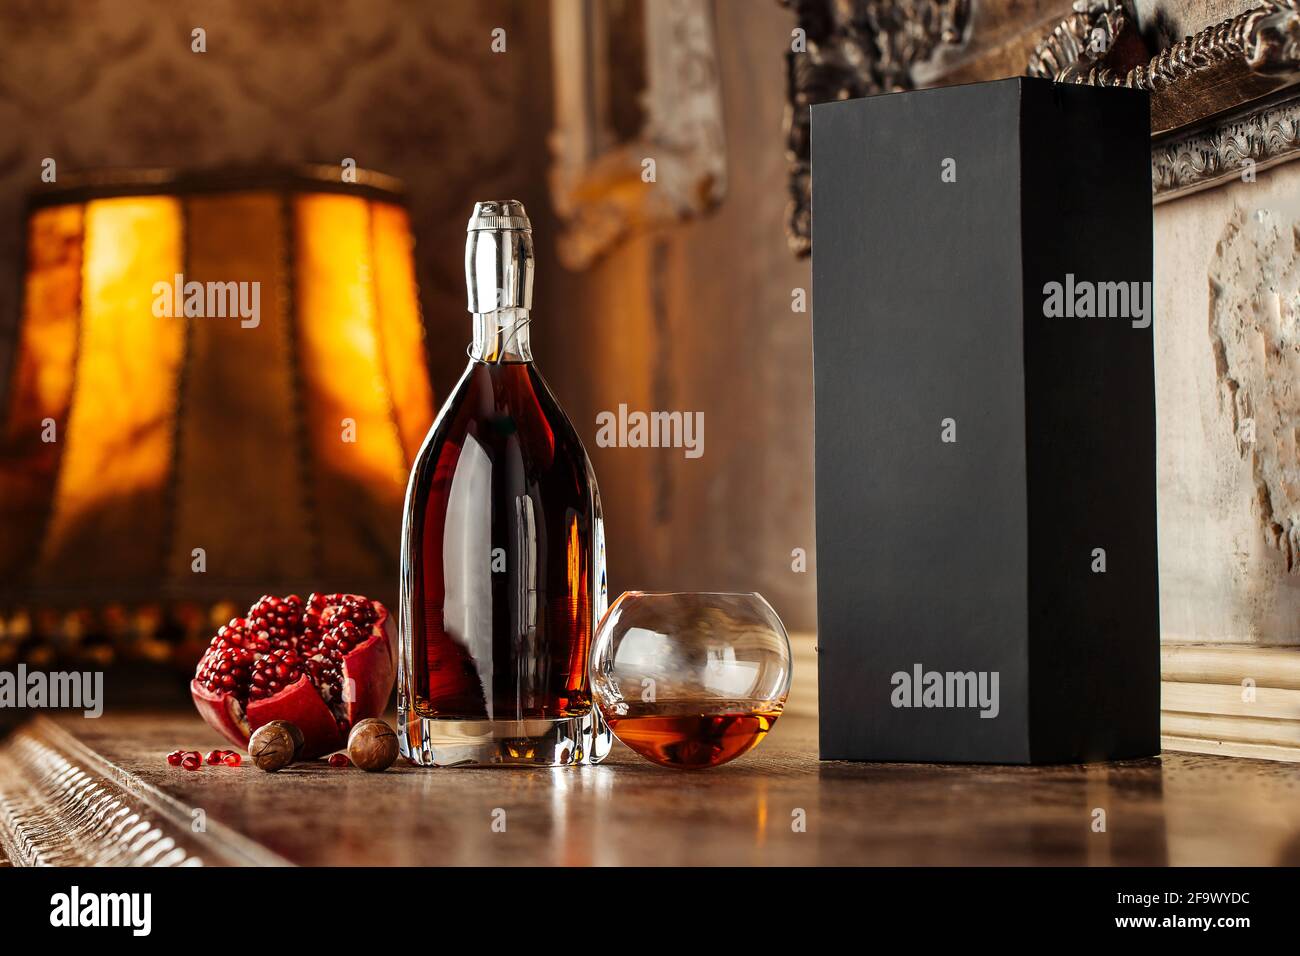 Elegant bottle of cognac with appetizers Stock Photo